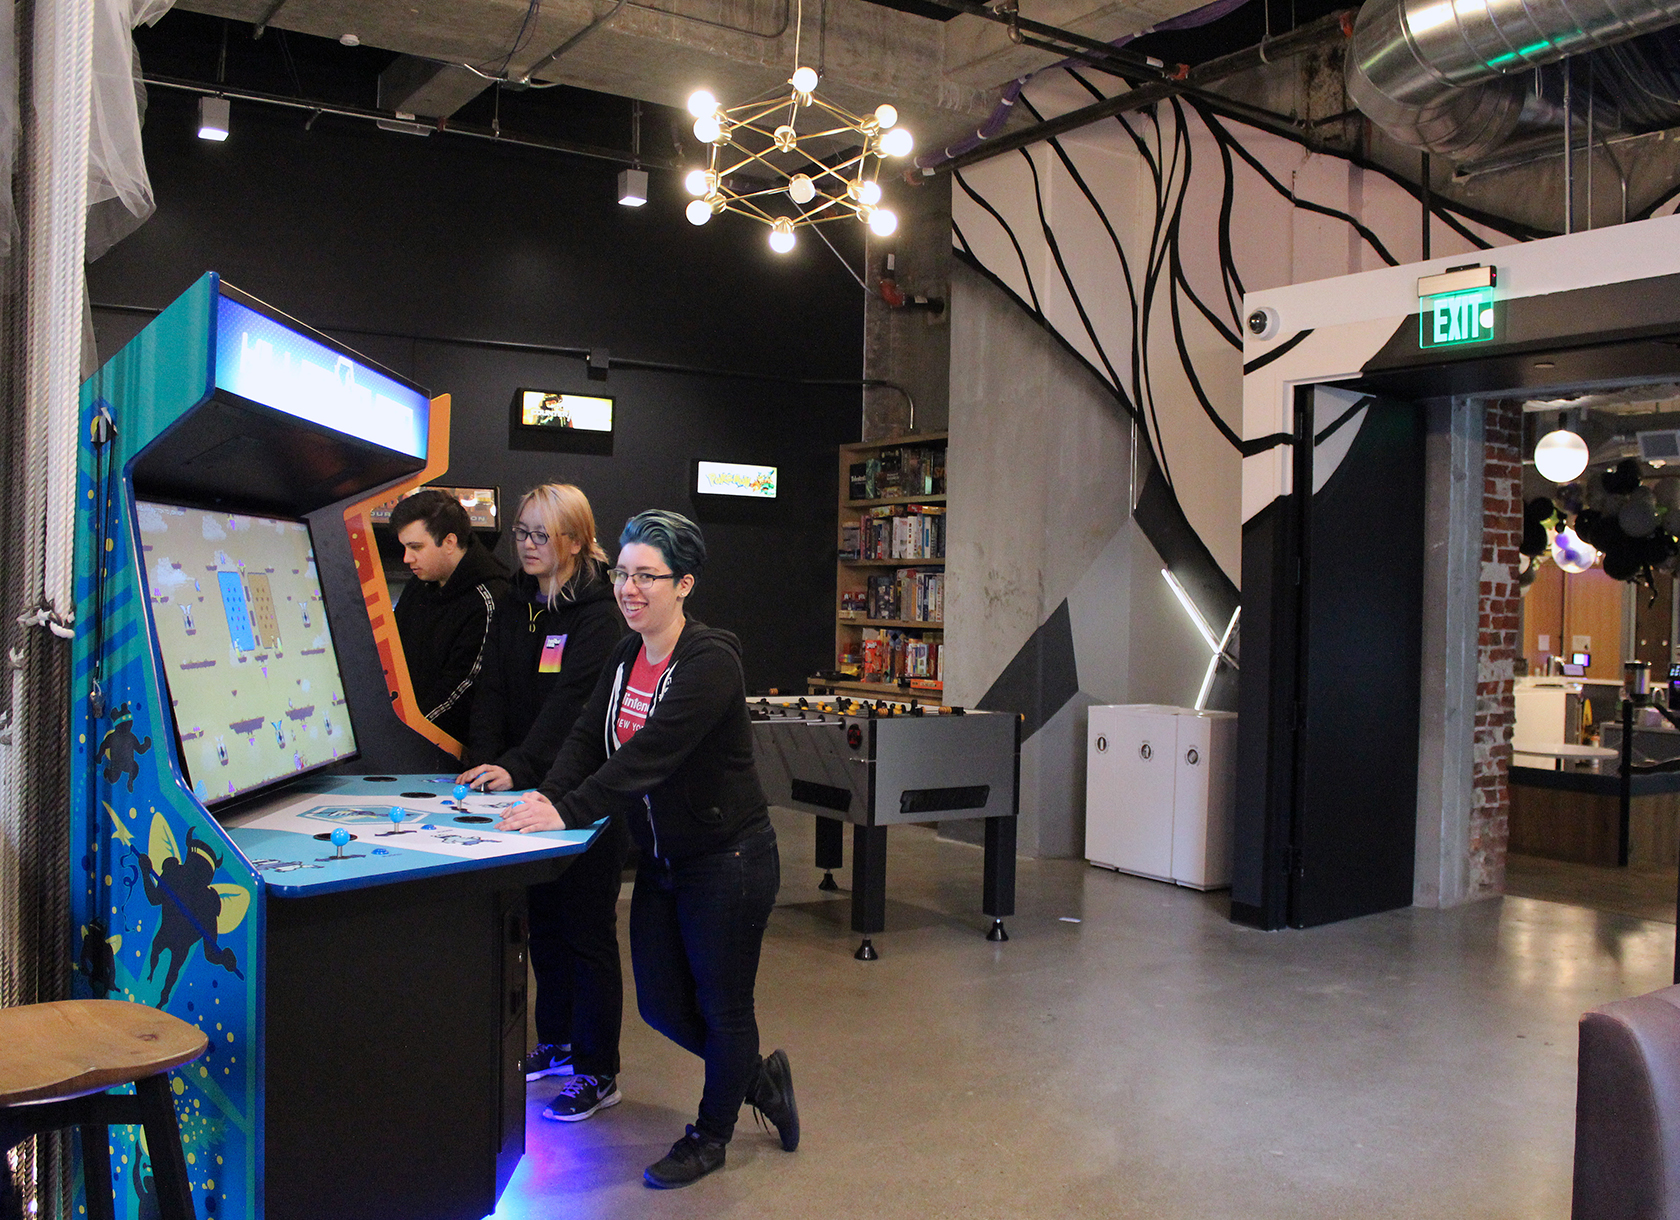 Three people playing arcade games in a game room.